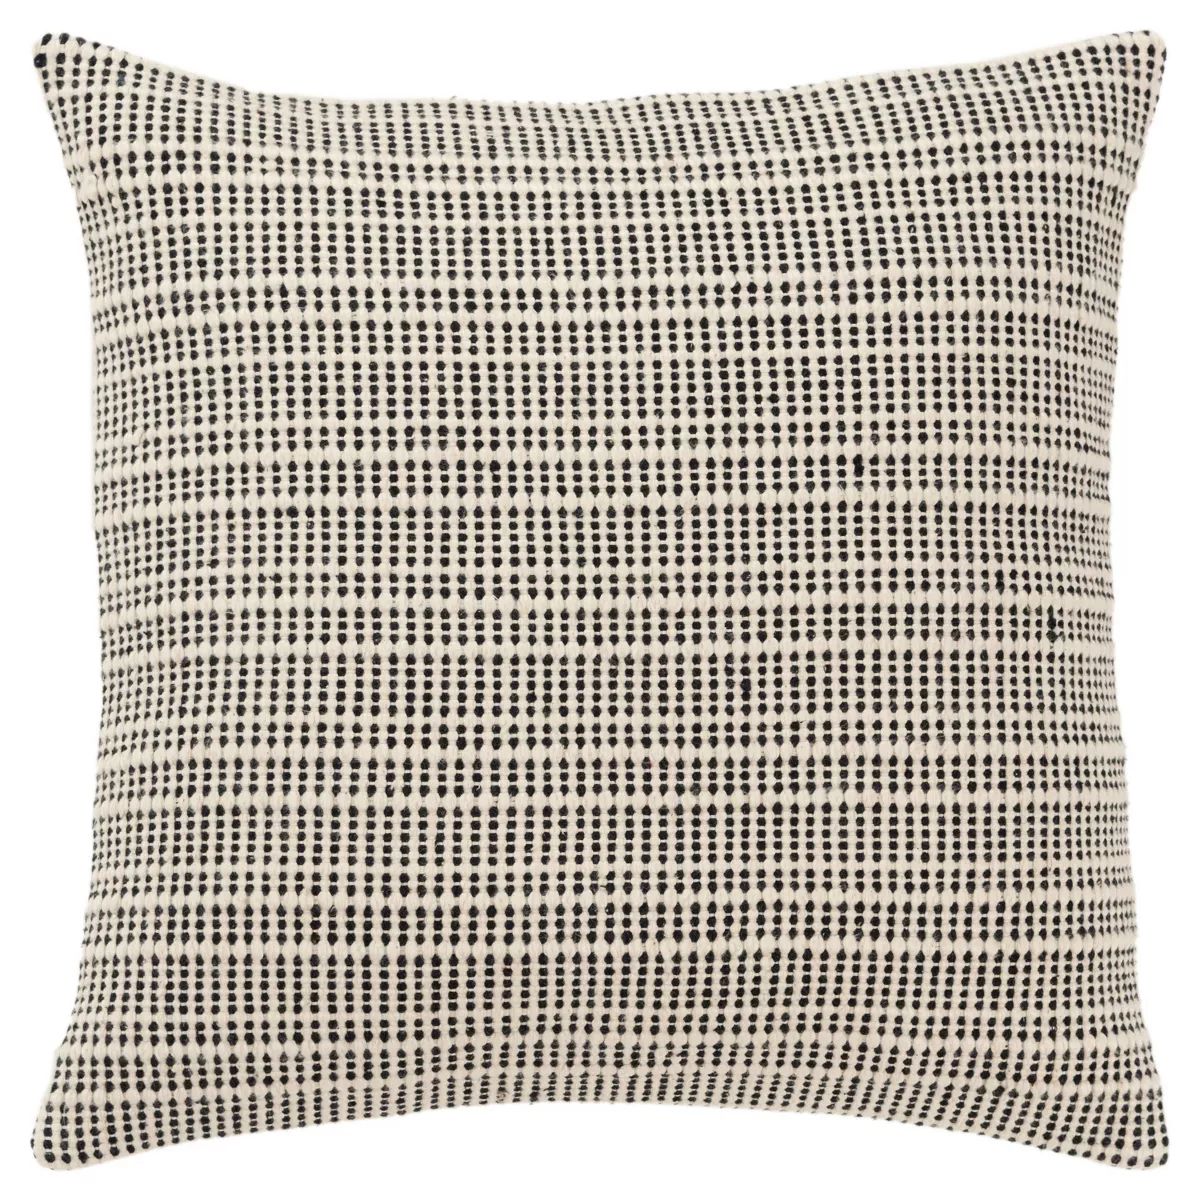 20"x20" Oversize Striped Square Throw Pillow Cover - Rizzy Home | Target